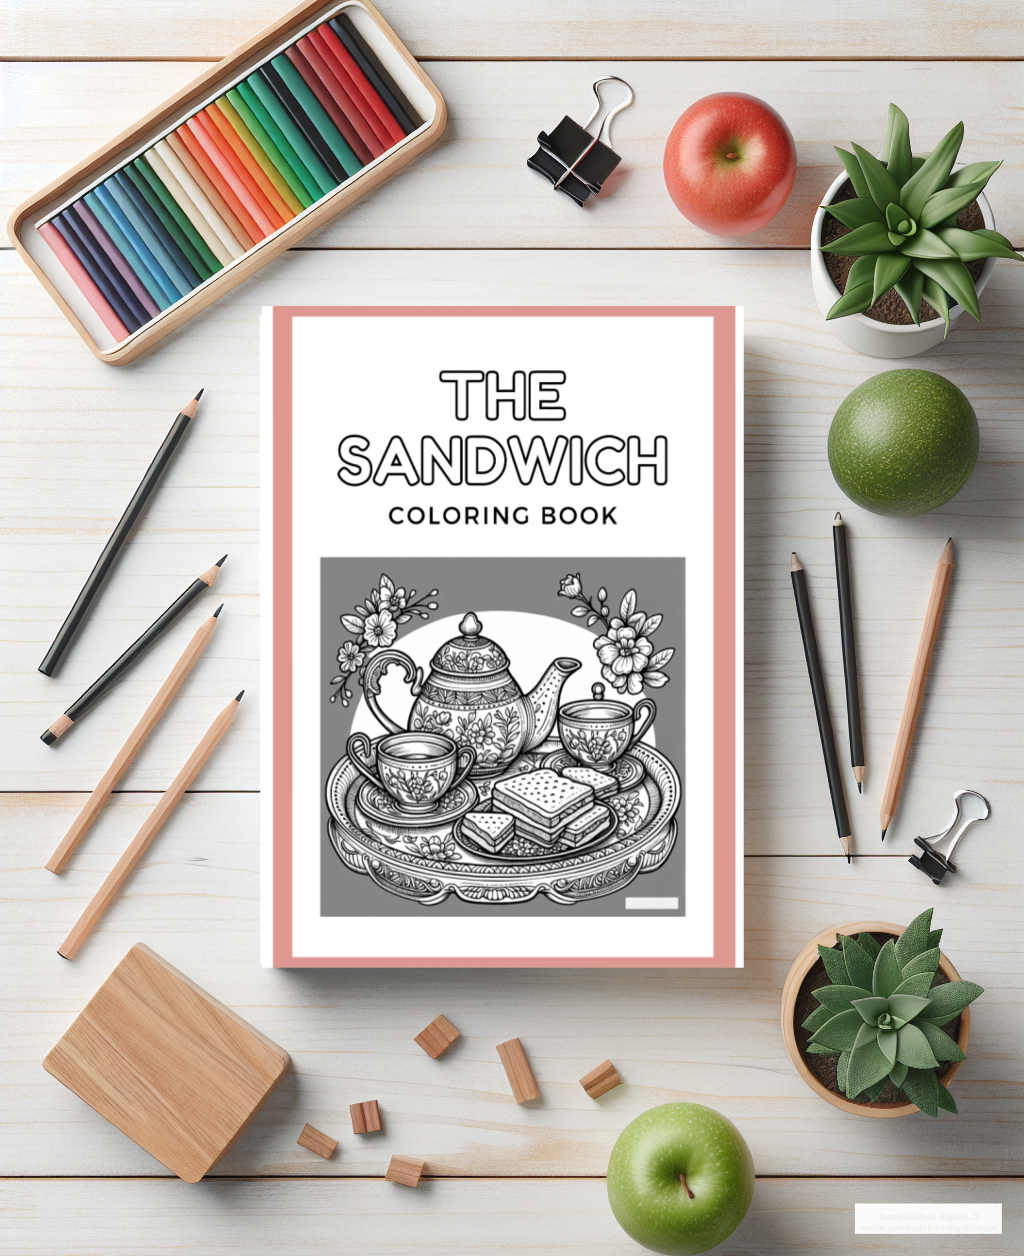 The Sandwich Coloring Book